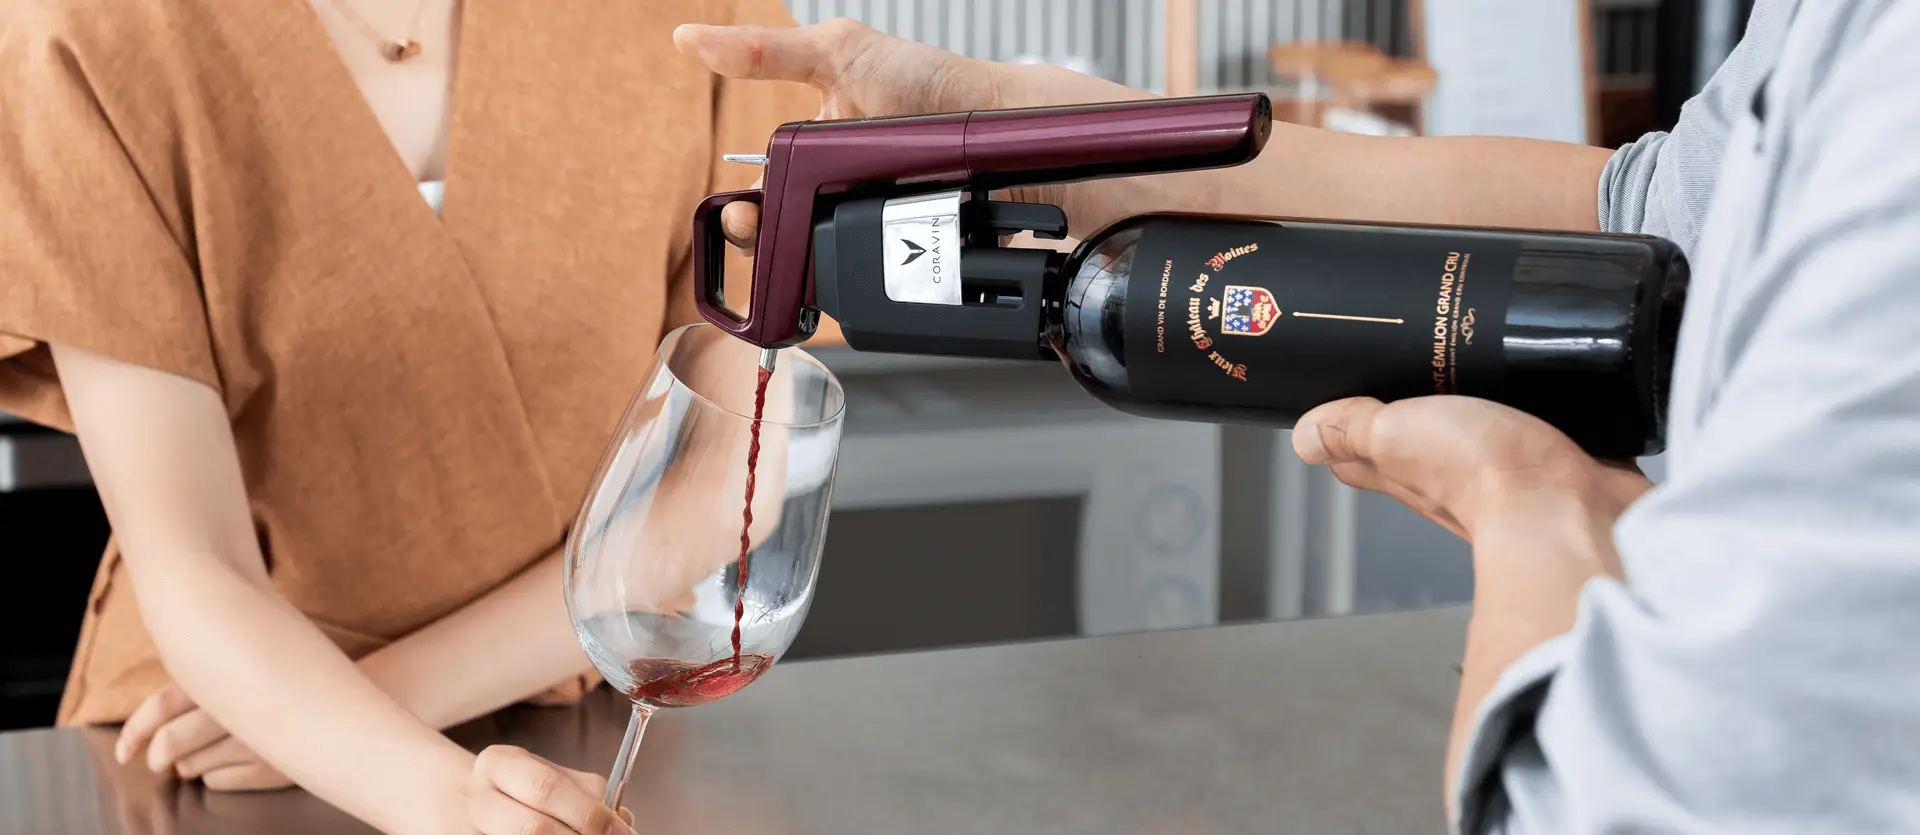 Is red good for you? | Coravin